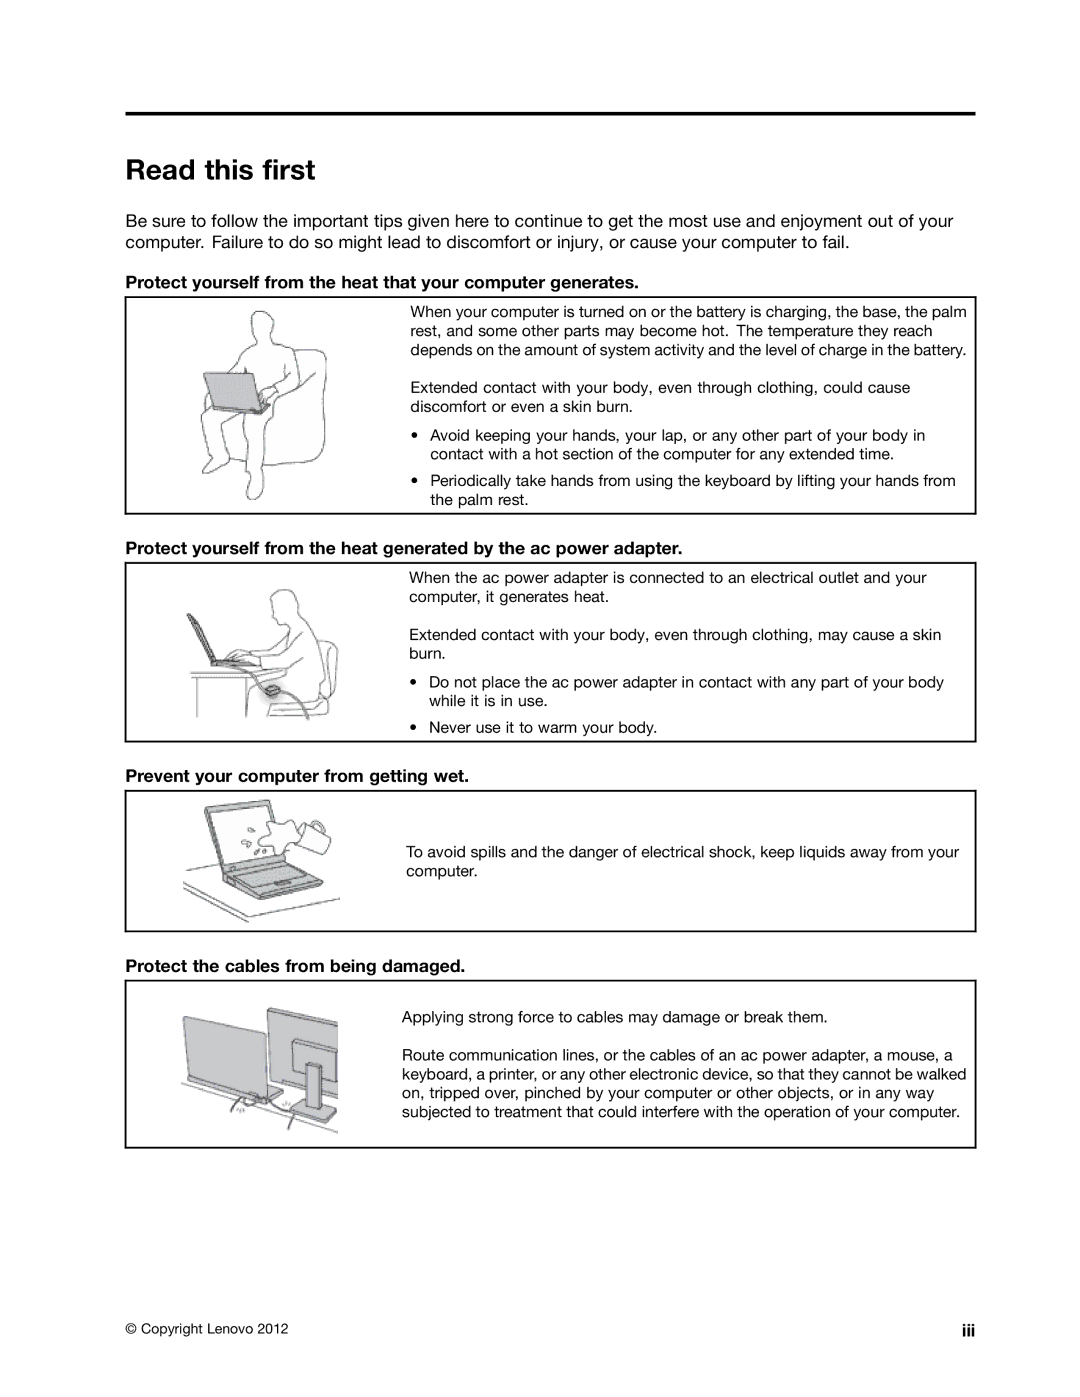 Lenovo B485 manual Read this first, Protect yourself from the heat that your computer generates 